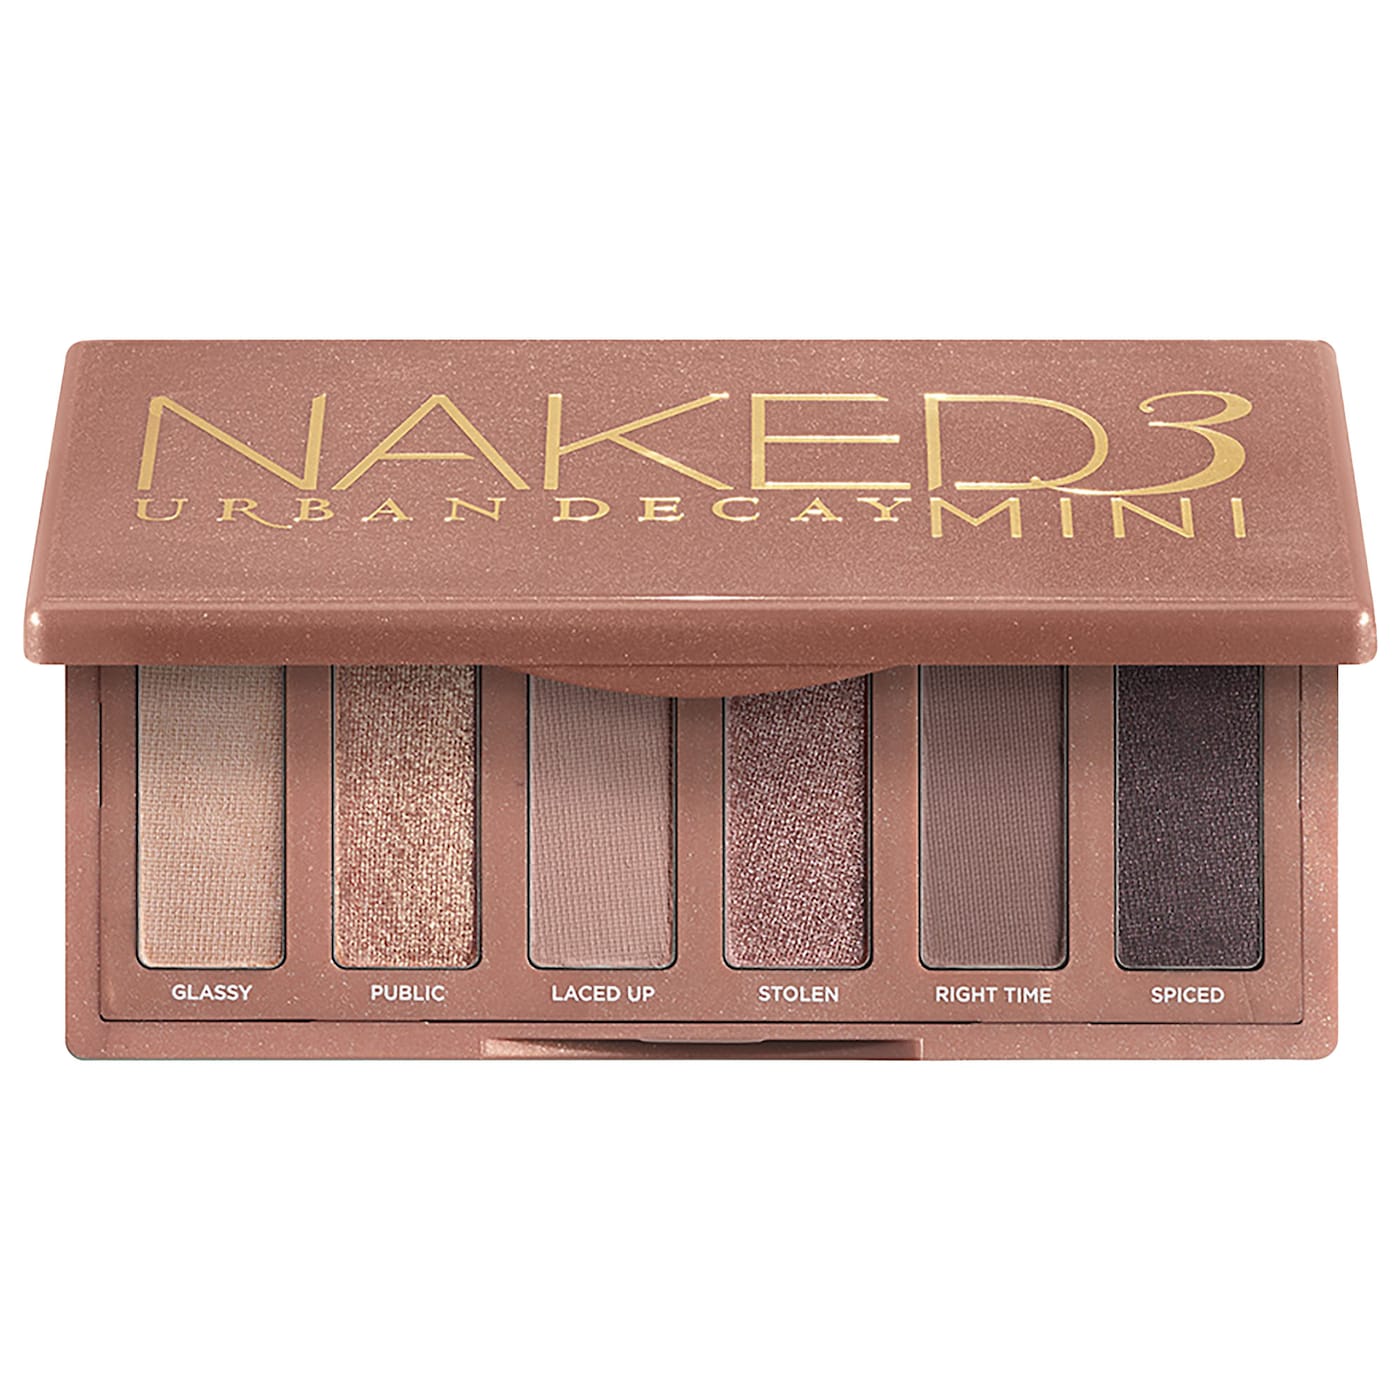 URBAN DECAY - Naked3 Eyeshadow Palette